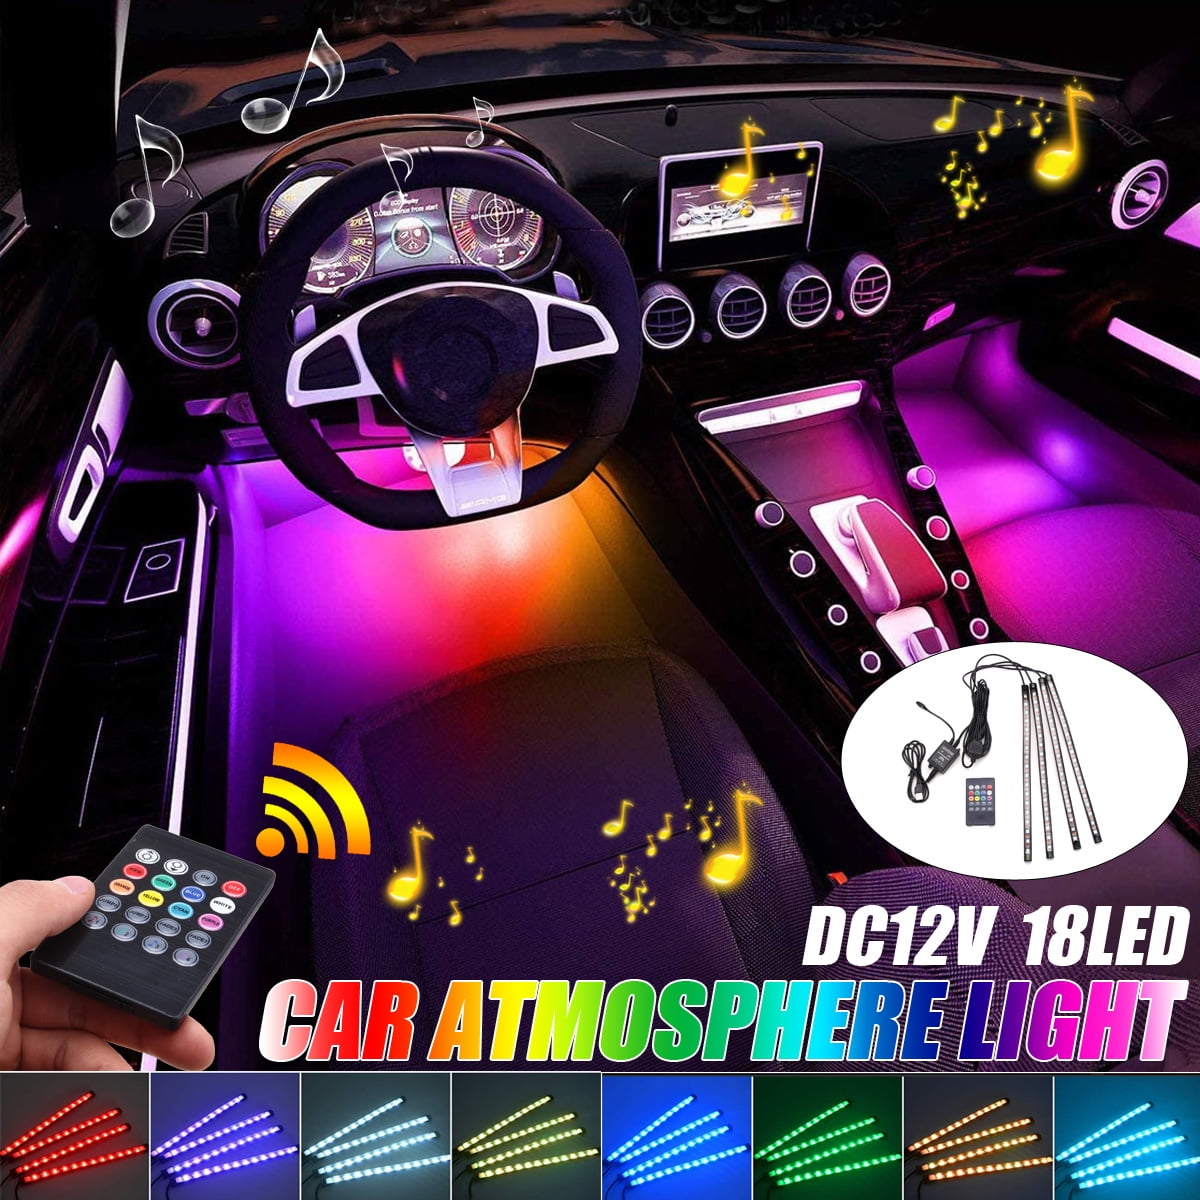 Details about   5M 12V Car Interior Decorative LED Wire Atmosphere Cold Light RGB Strip Lamp US 